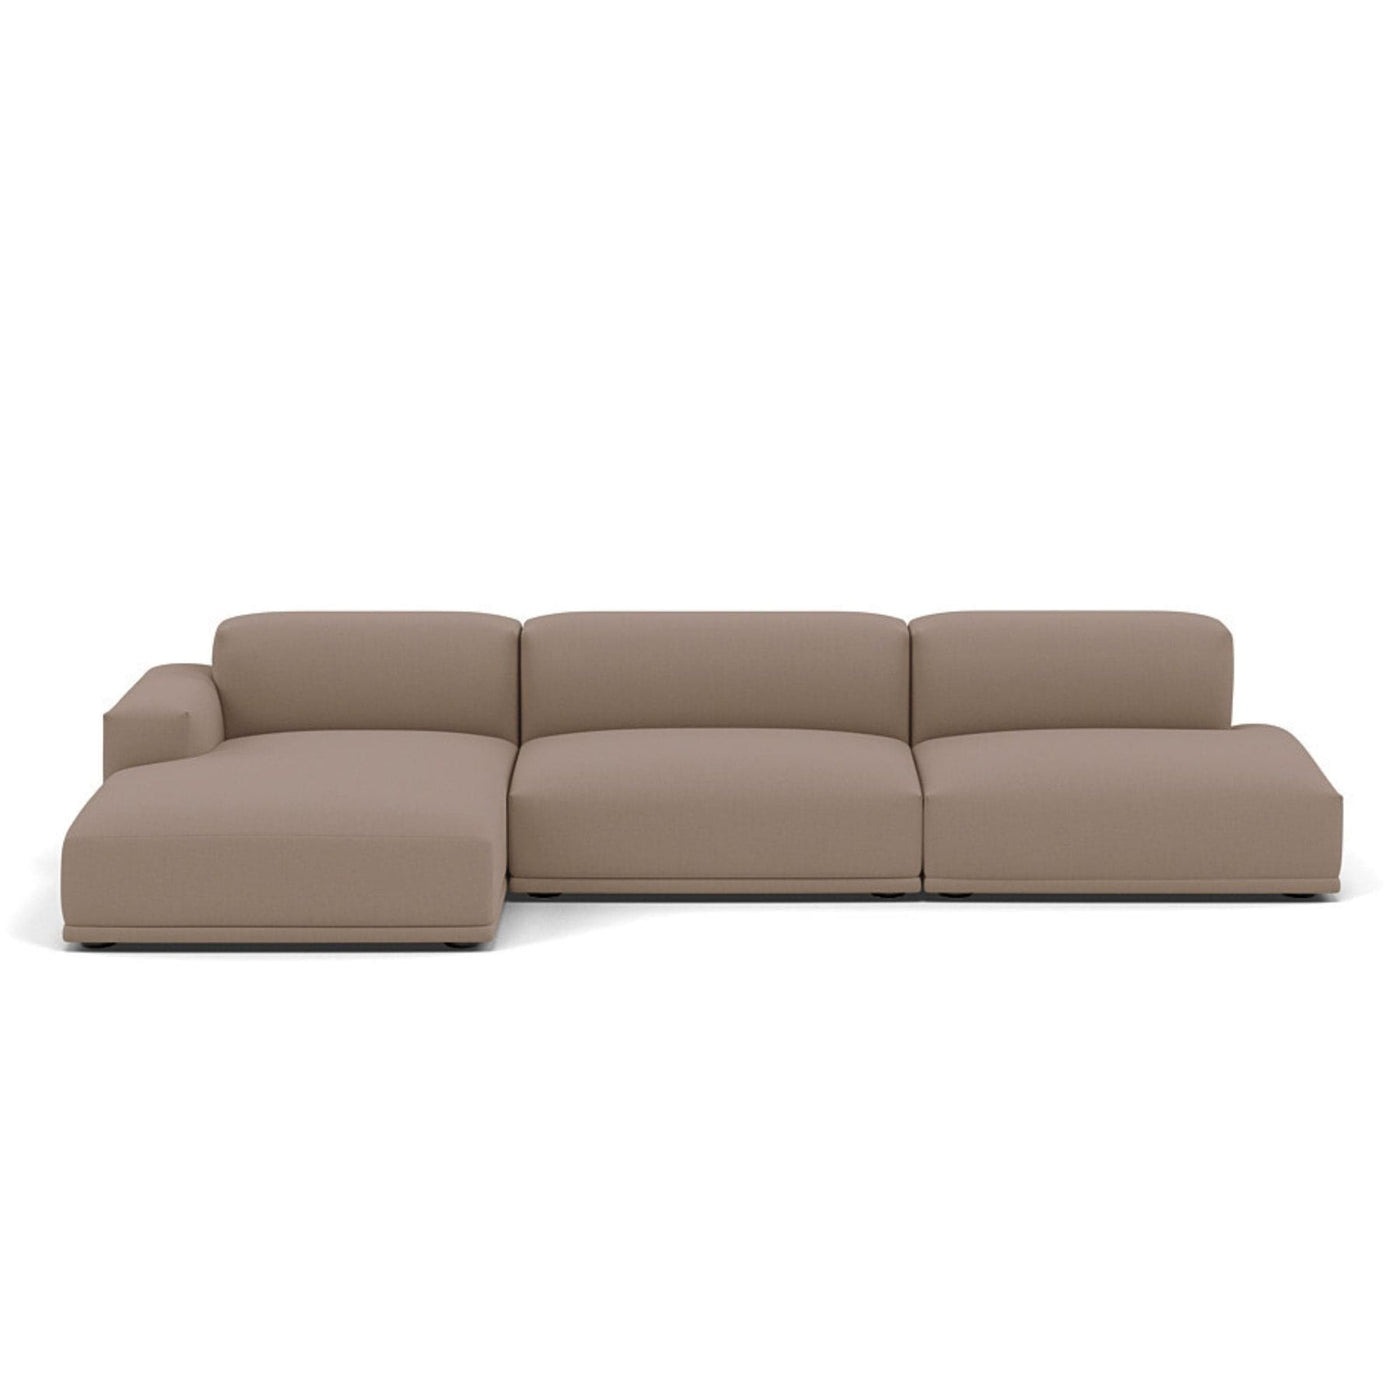 connect modular 3 seater sofa by Muuto